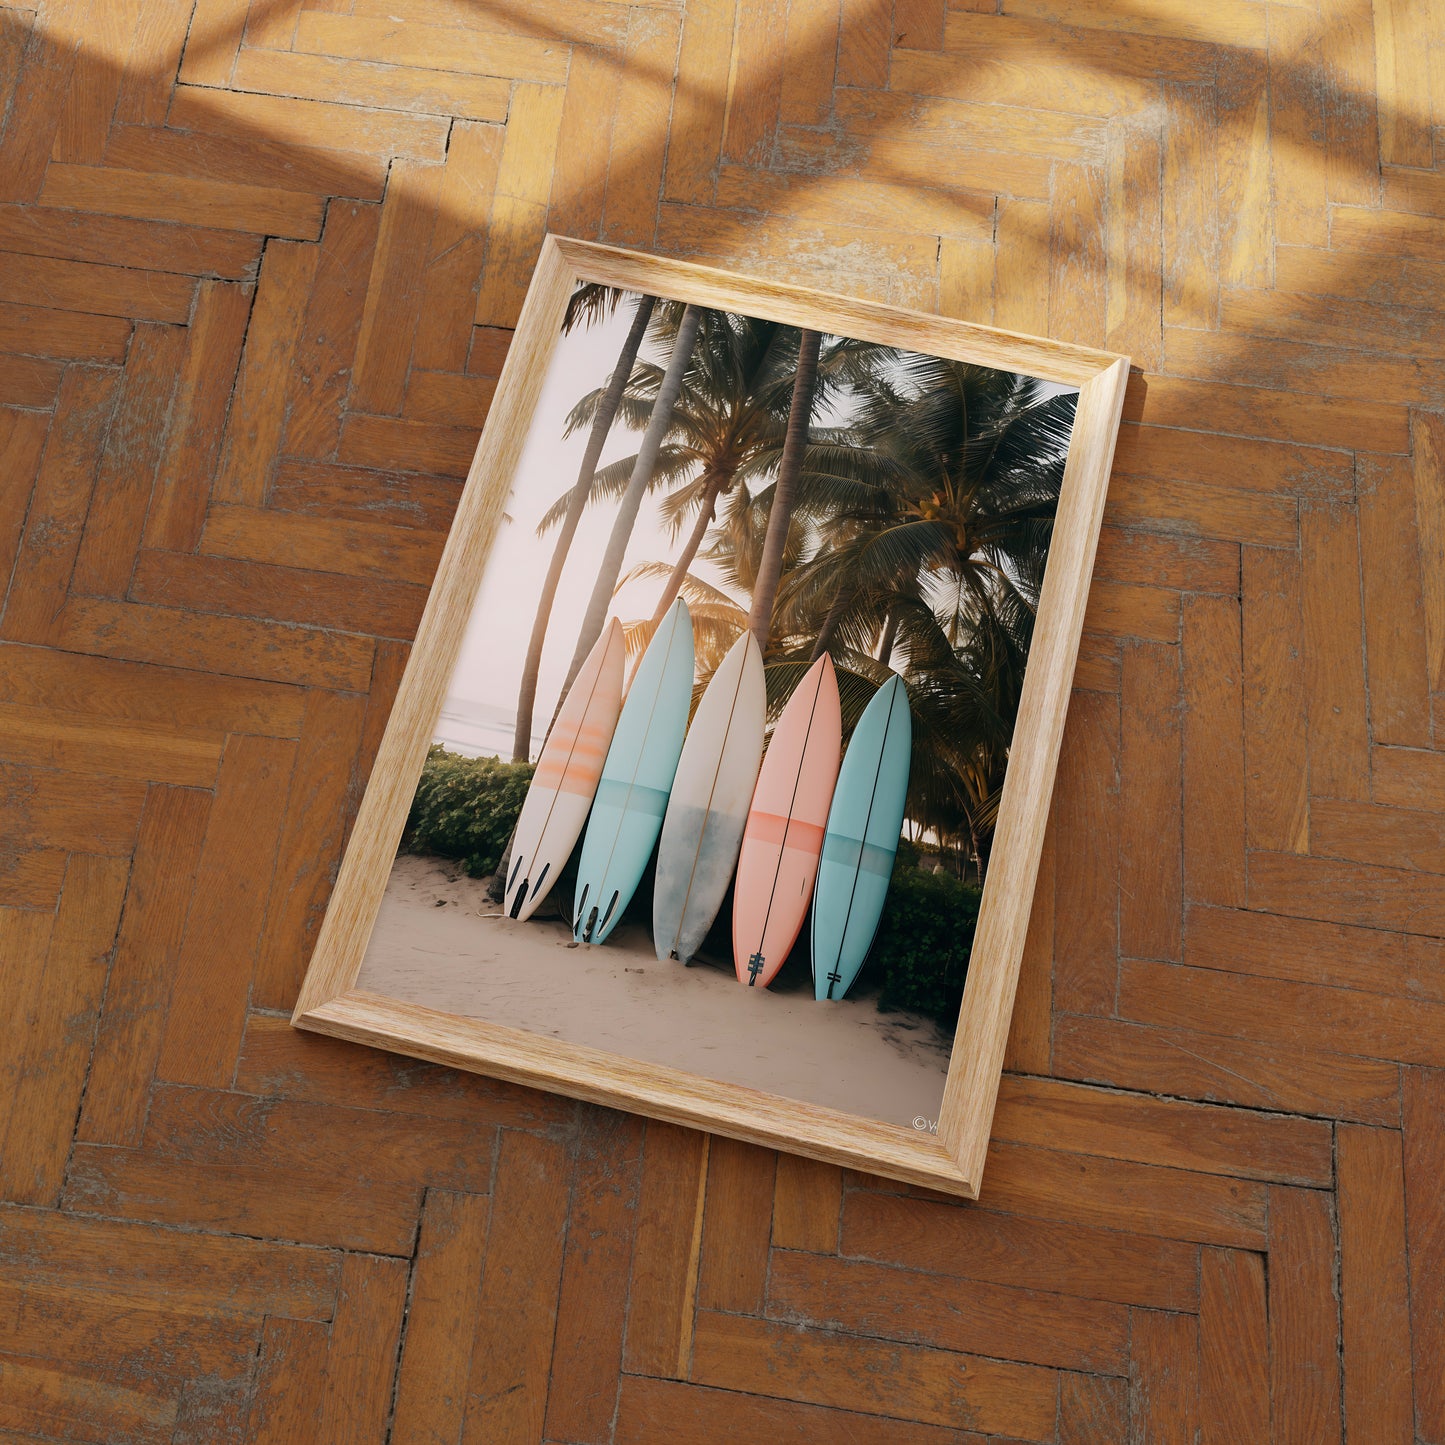 A framed picture of colorful surfboards leaned against palm trees on a beach, hung on a stone wall.